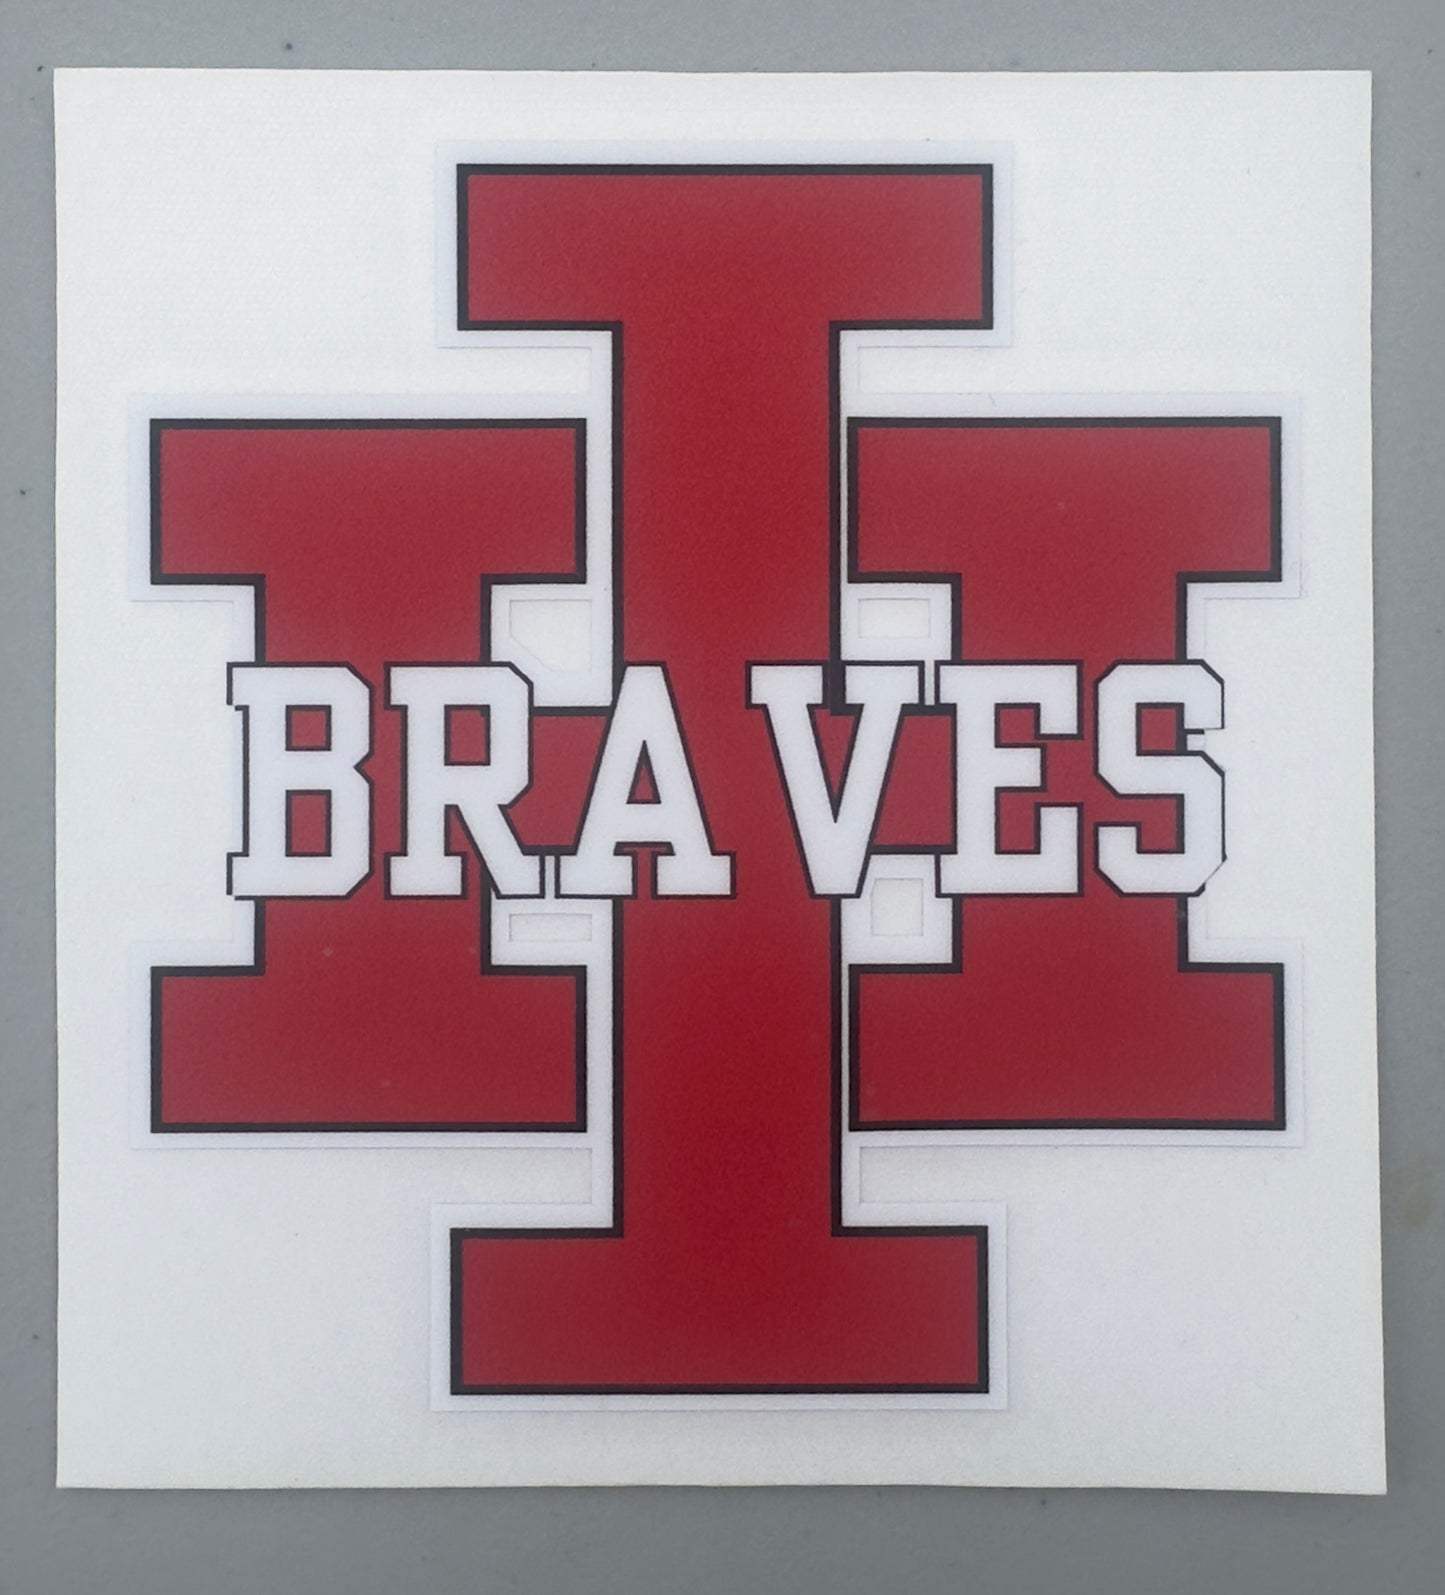 Large Braves stickers (No Discounts)